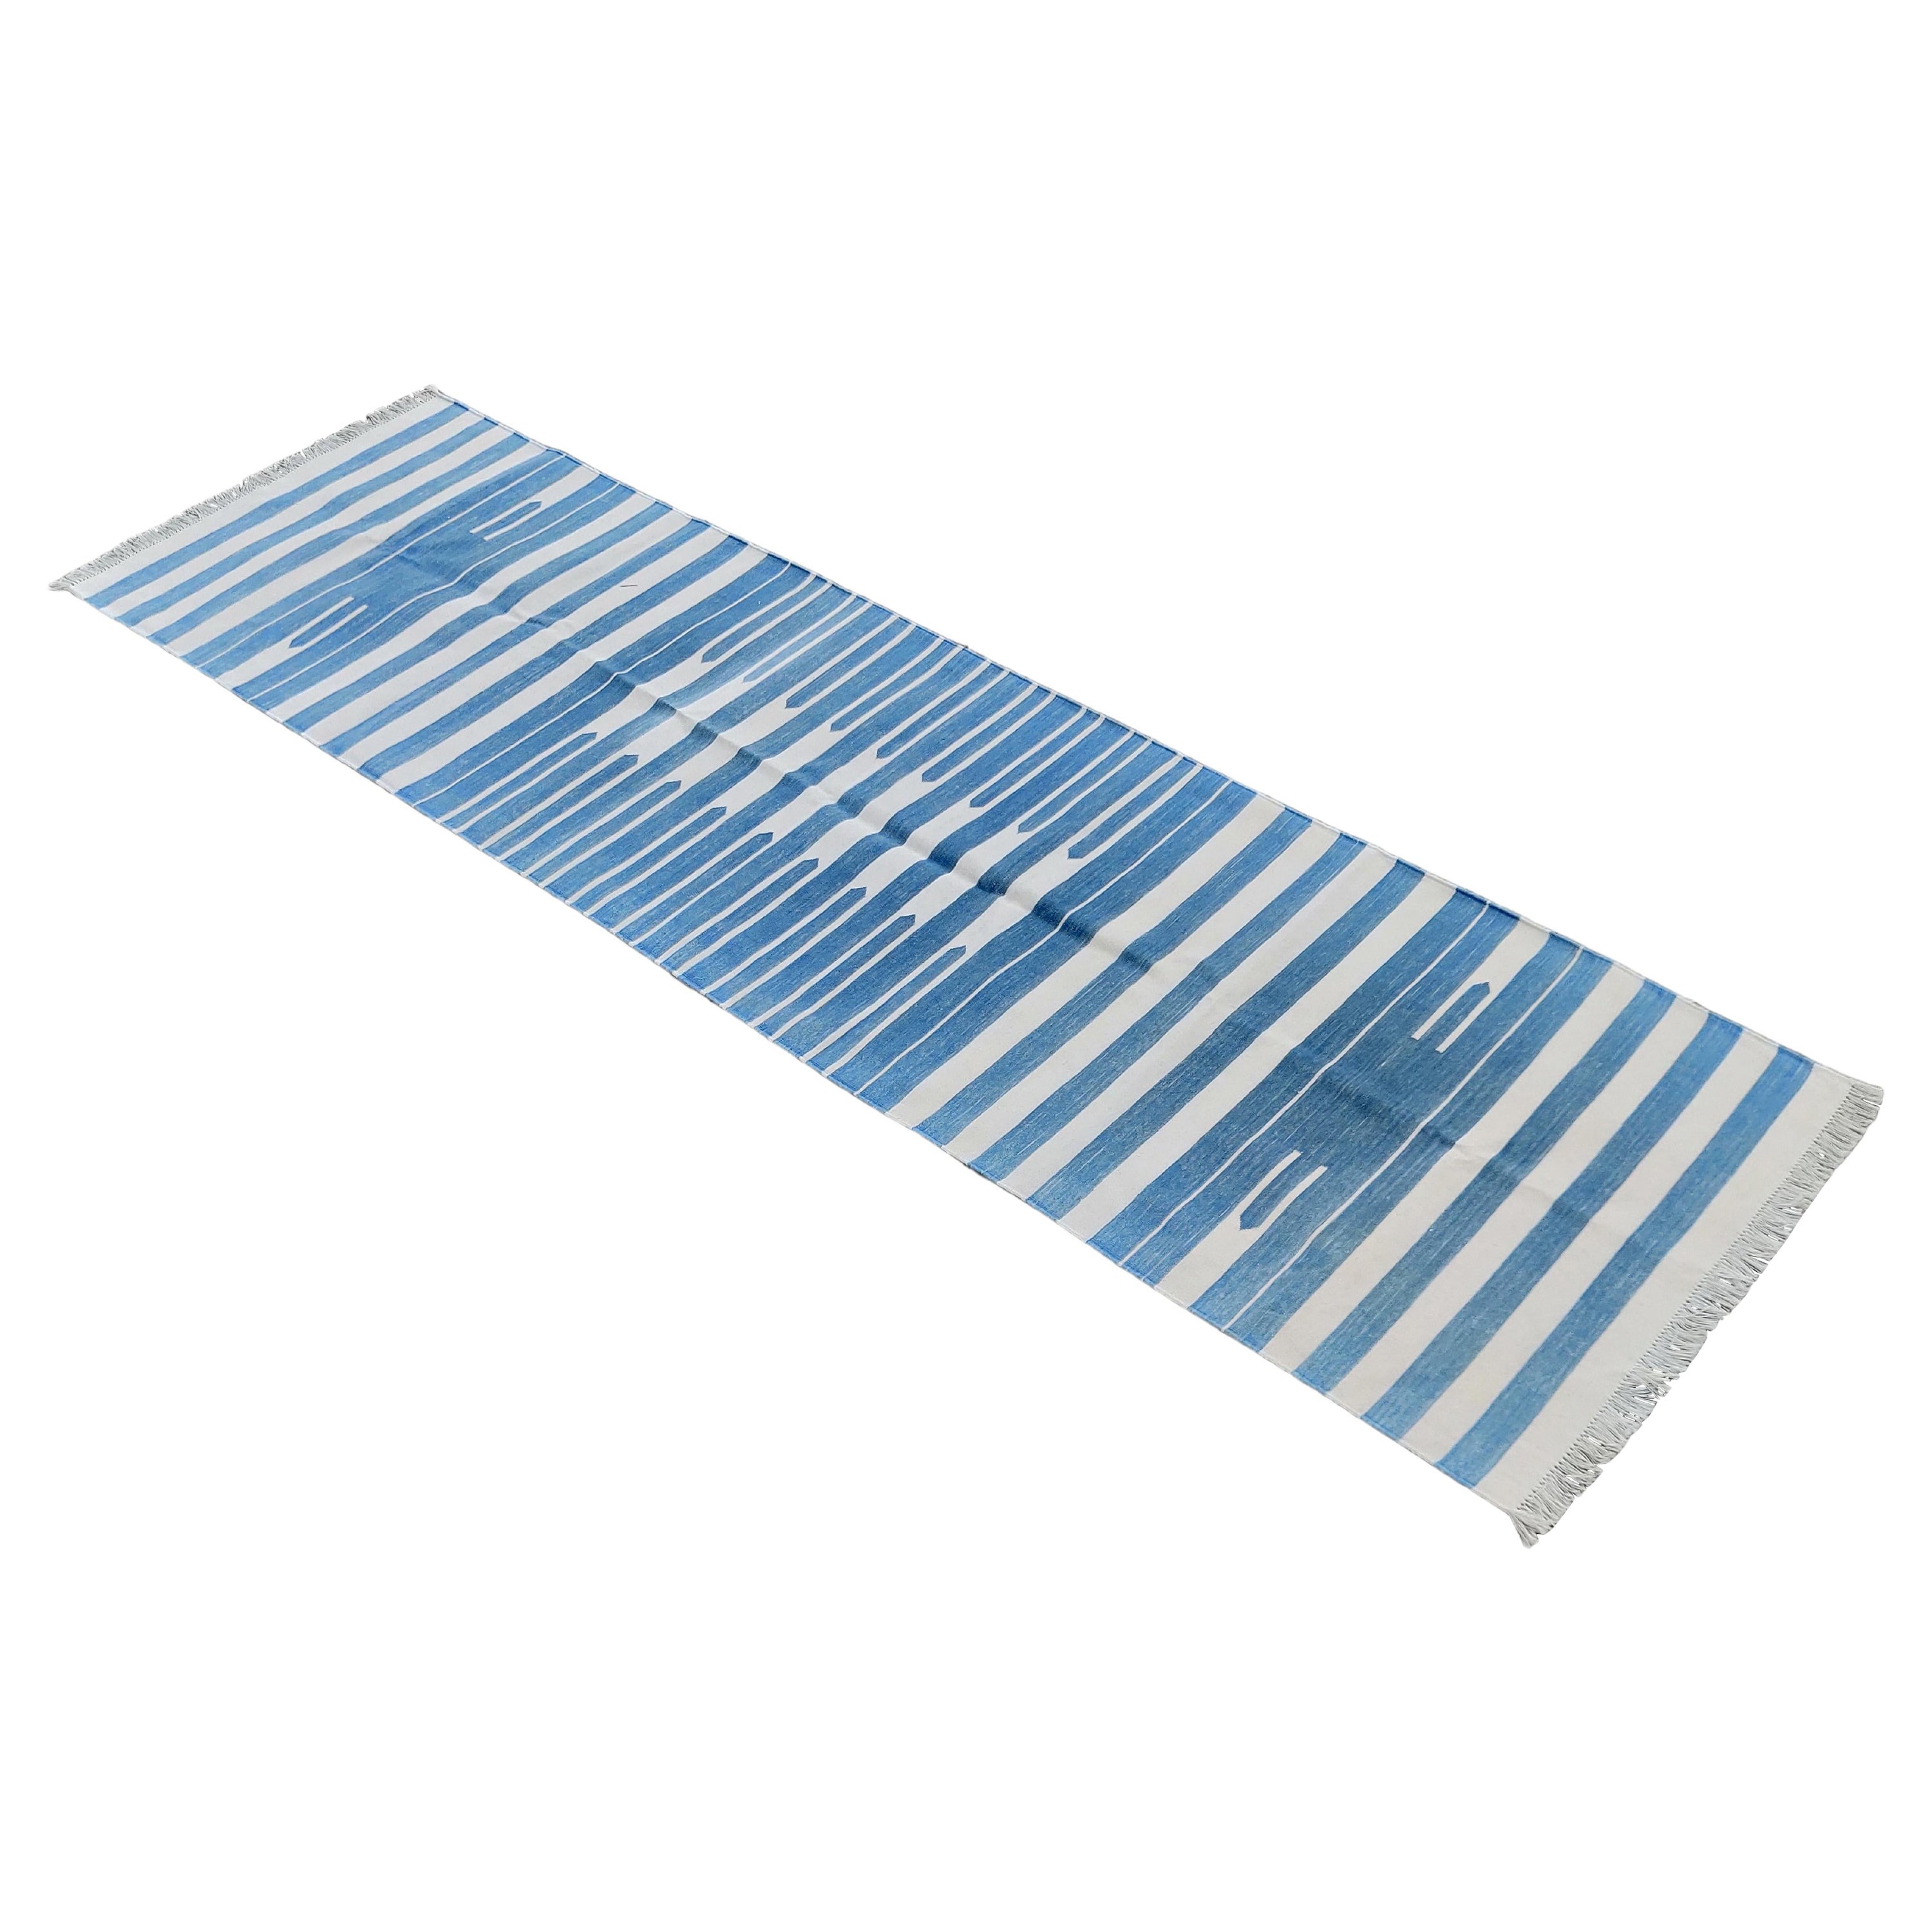 Handmade Cotton Area Flat Weave Runner, 3x12 Blue And White Striped Dhurrie Rug For Sale